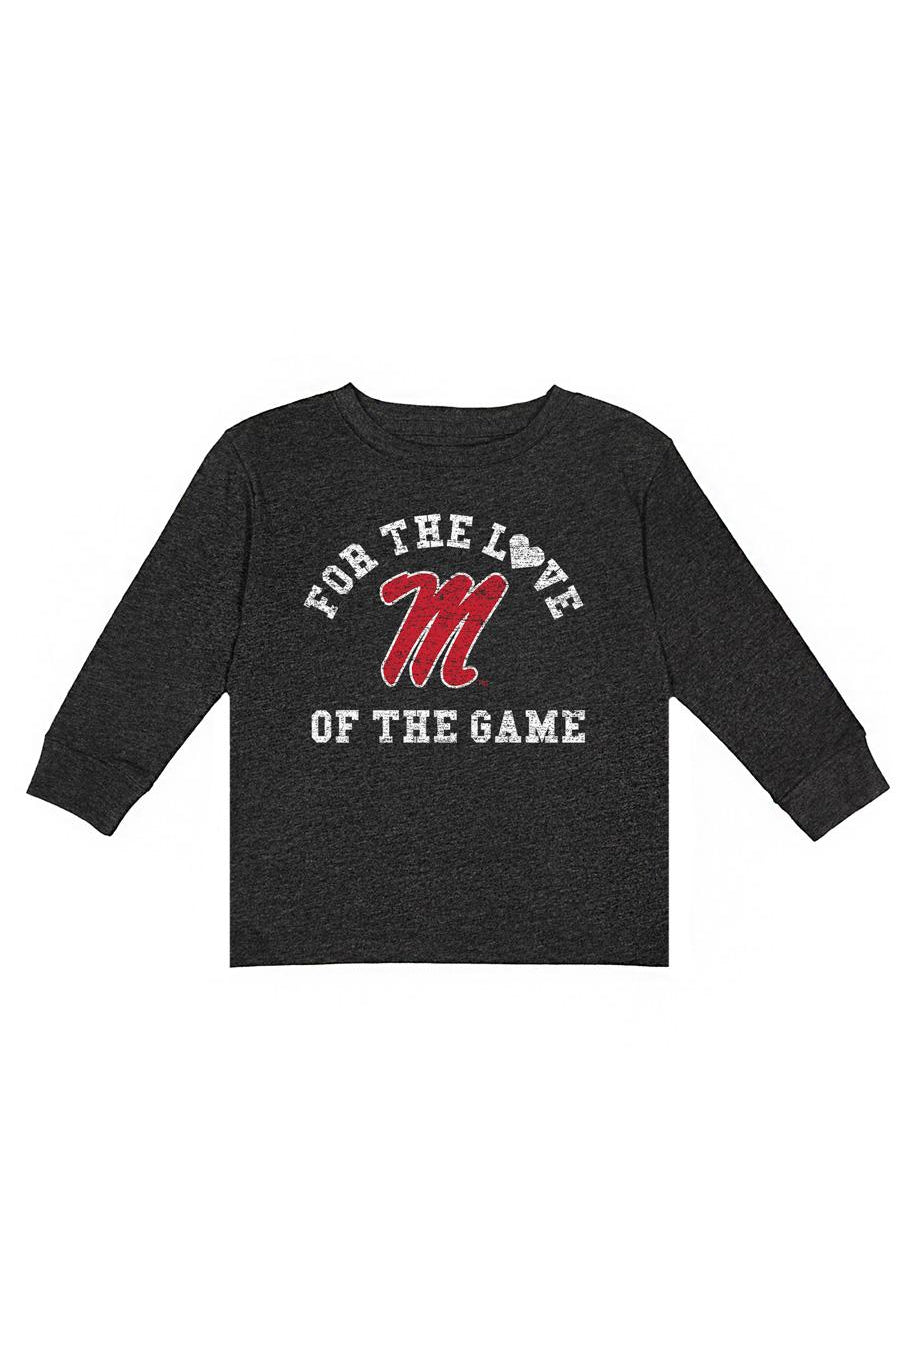 OLE MISS REBELS "FOR THE LOVE" CLASSIC GRAPHIC LONG SLEEVE CREW TODDLER TEE